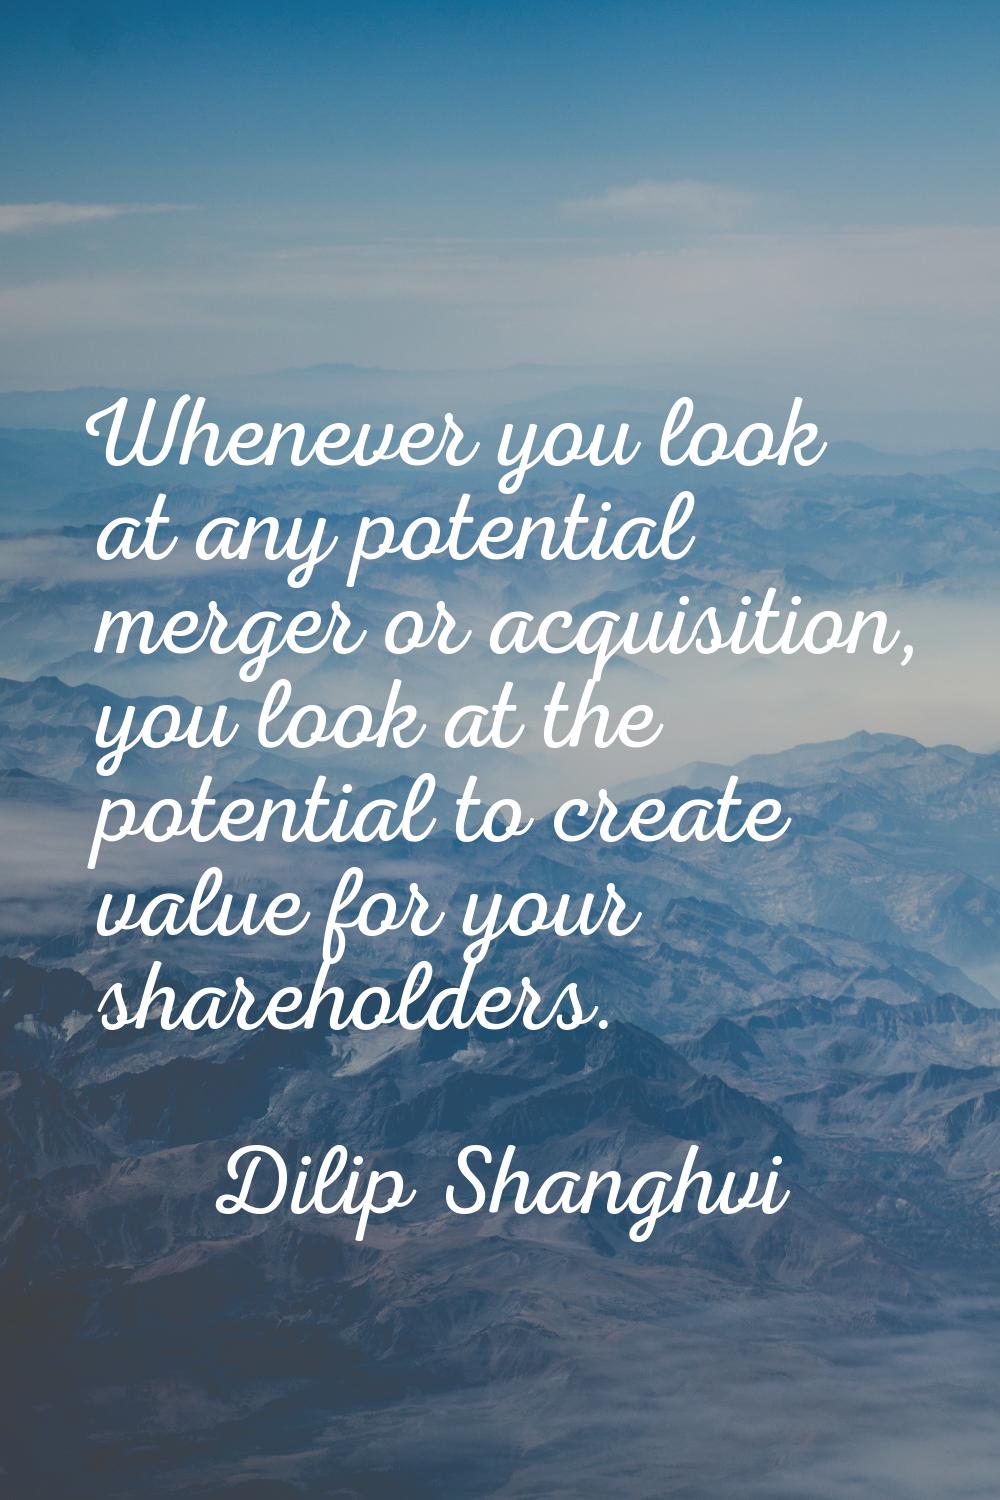 Whenever you look at any potential merger or acquisition, you look at the potential to create value